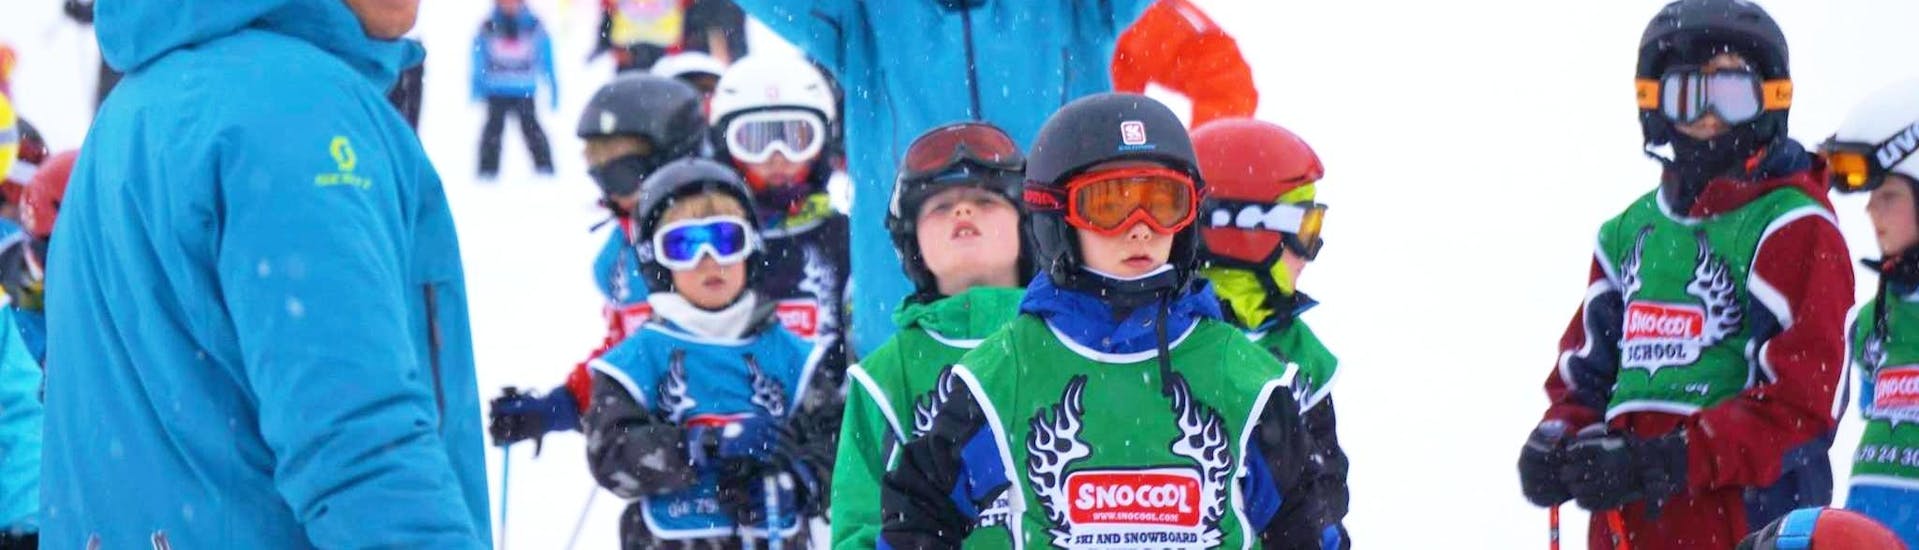 People going a Private Ski Lessons for Kids of All Levels with Snocool in Sainte-Foy-Tarentaise.